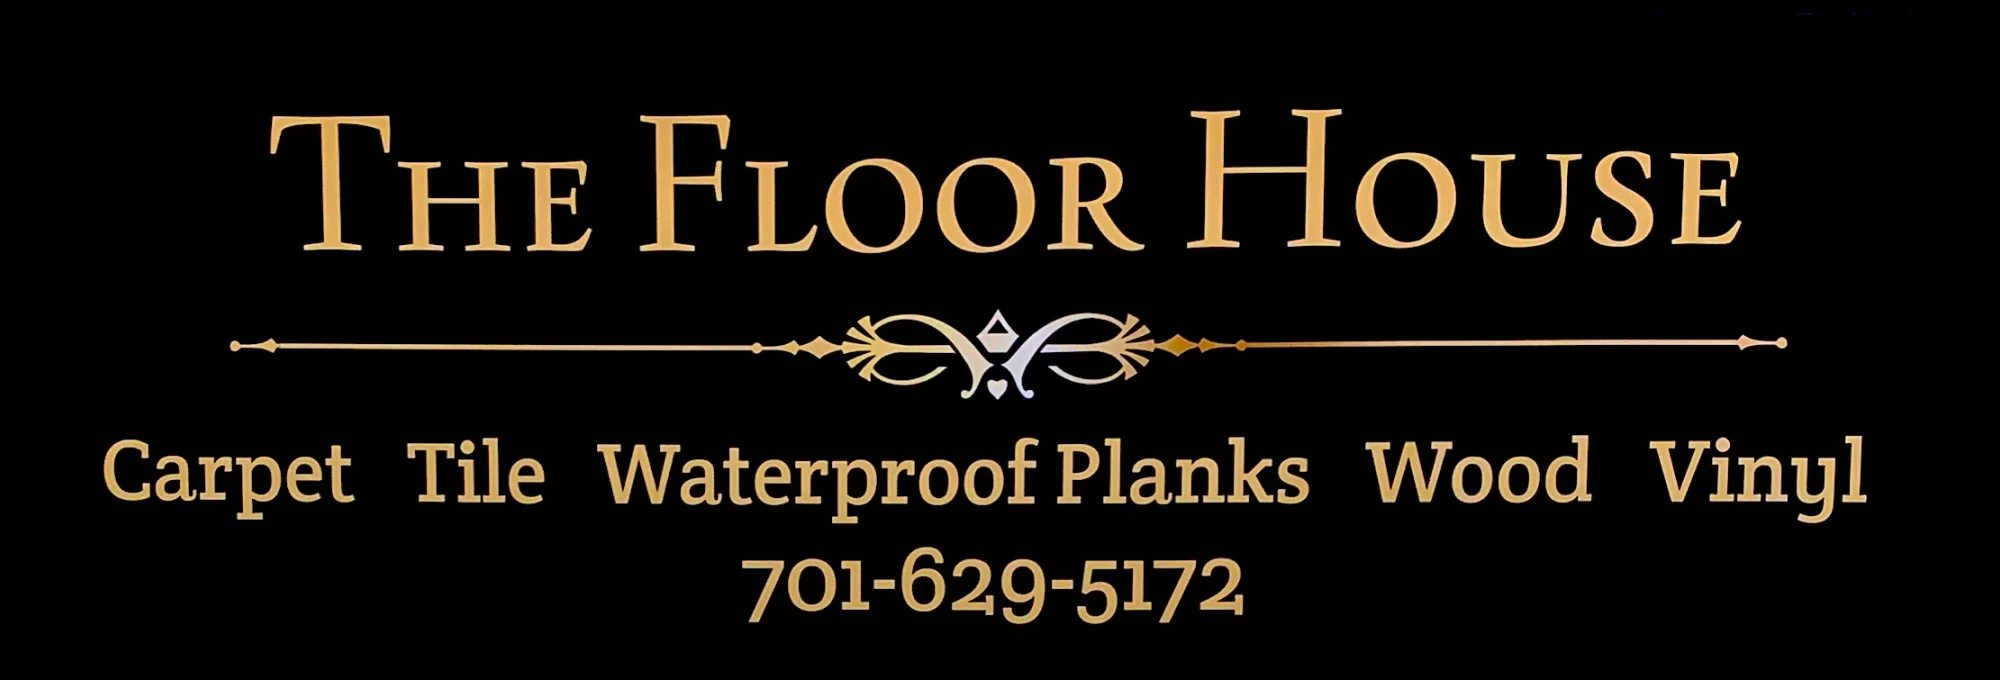 Flooring store in Power Lakes, ND - The Floor House